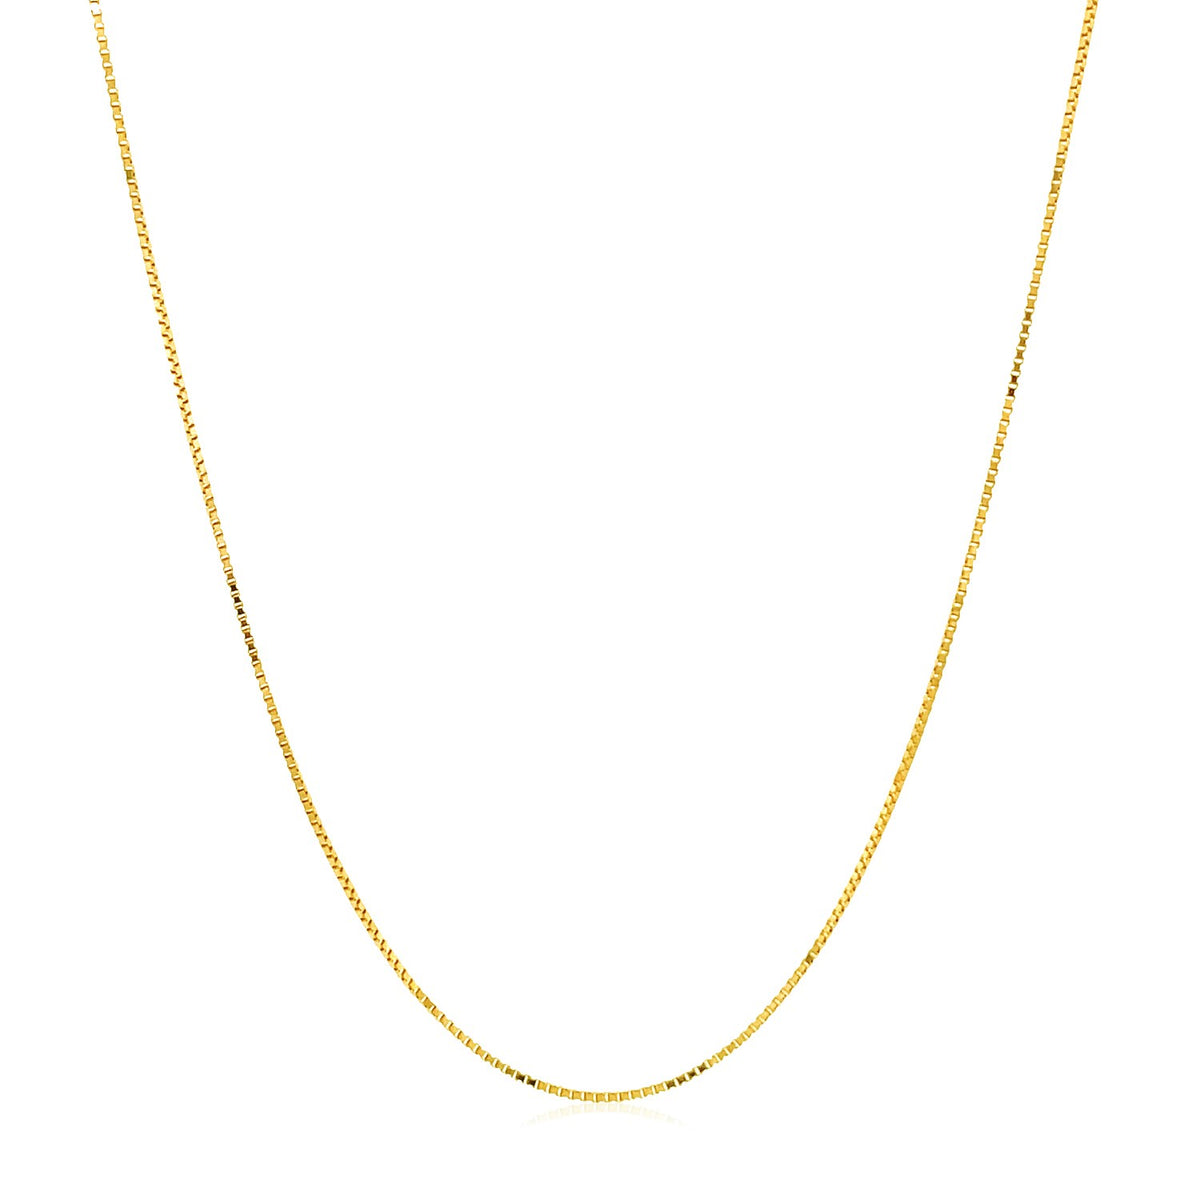 Double Extendable Box Chain - 14k Yellow Gold 0.51mm